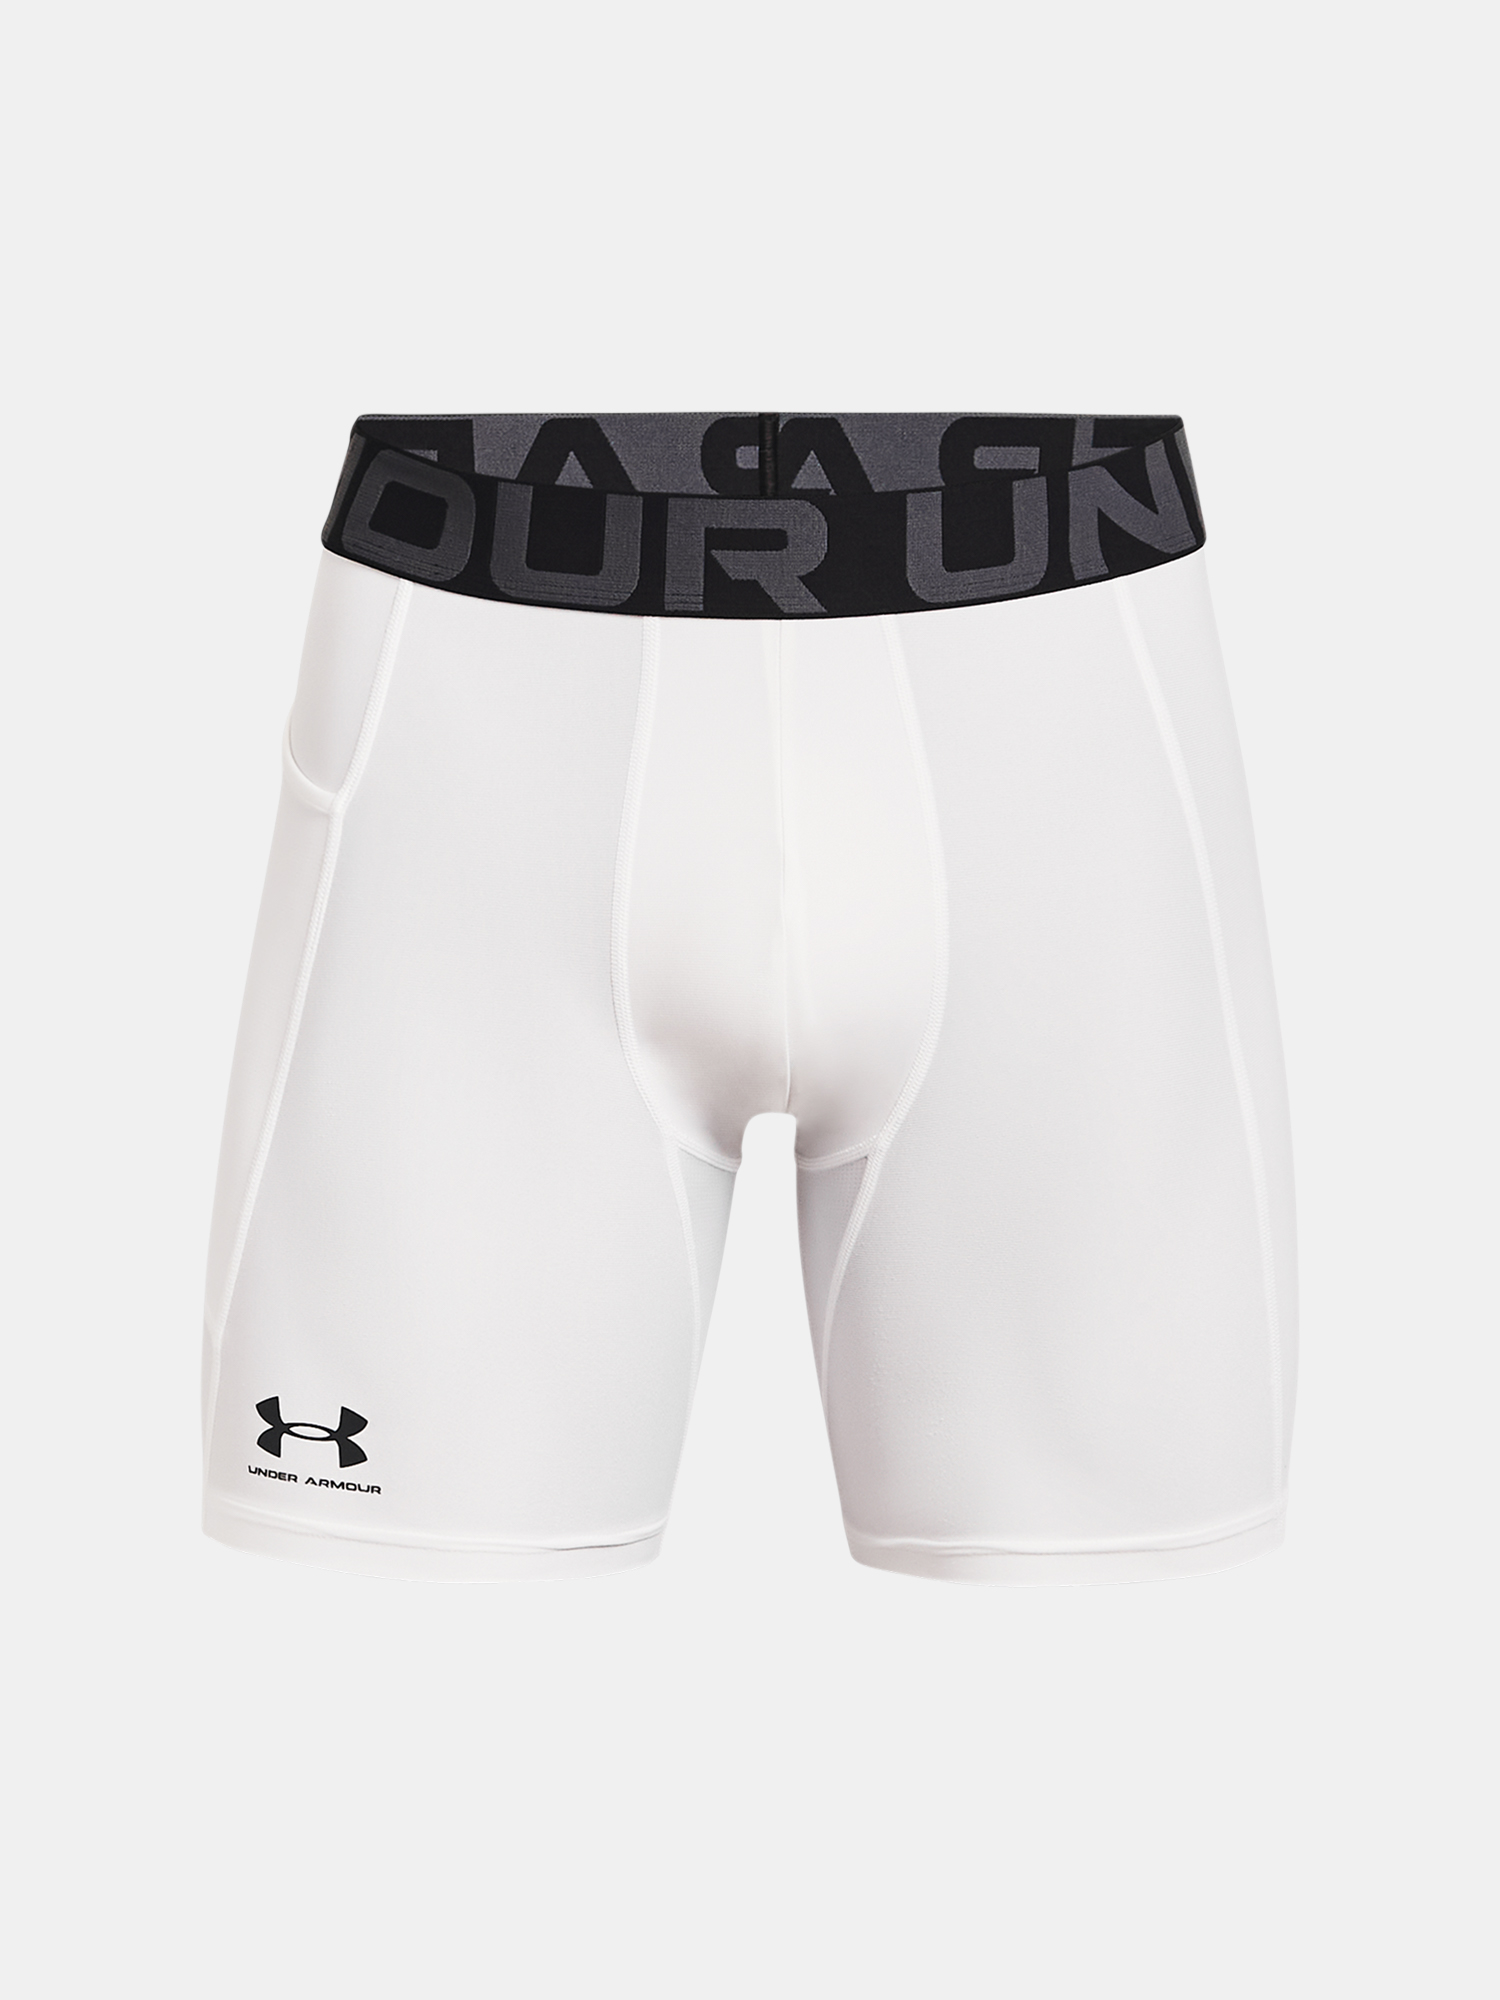 Men's Shorts Under Armour GRY